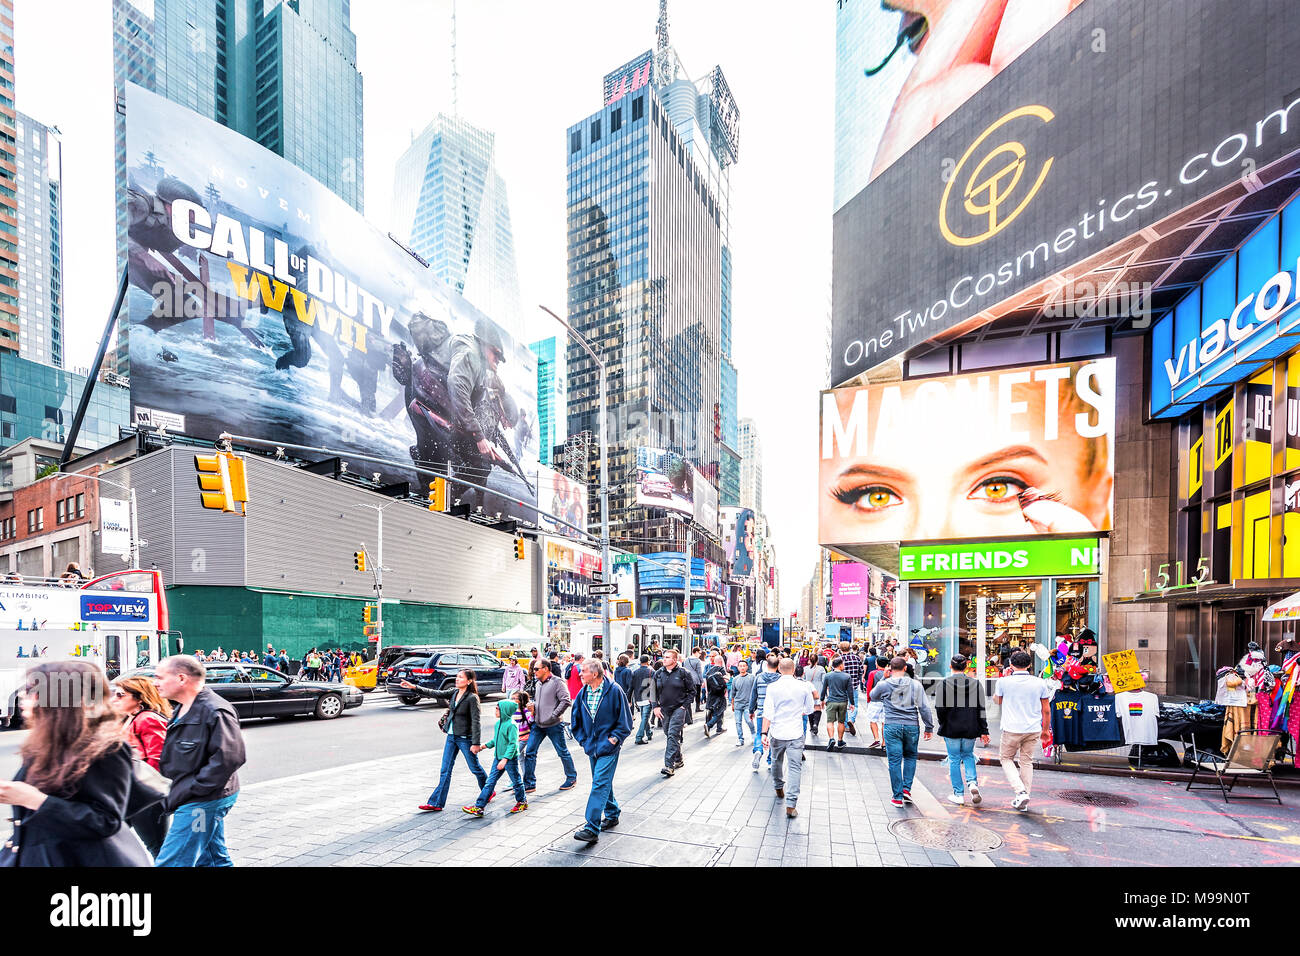 New York City, USA - October 28, 2017: Manhattan NYC buildings of midtown Times Square, Broadway avenue road, signs ads, many large huge crowd of peop Stock Photo